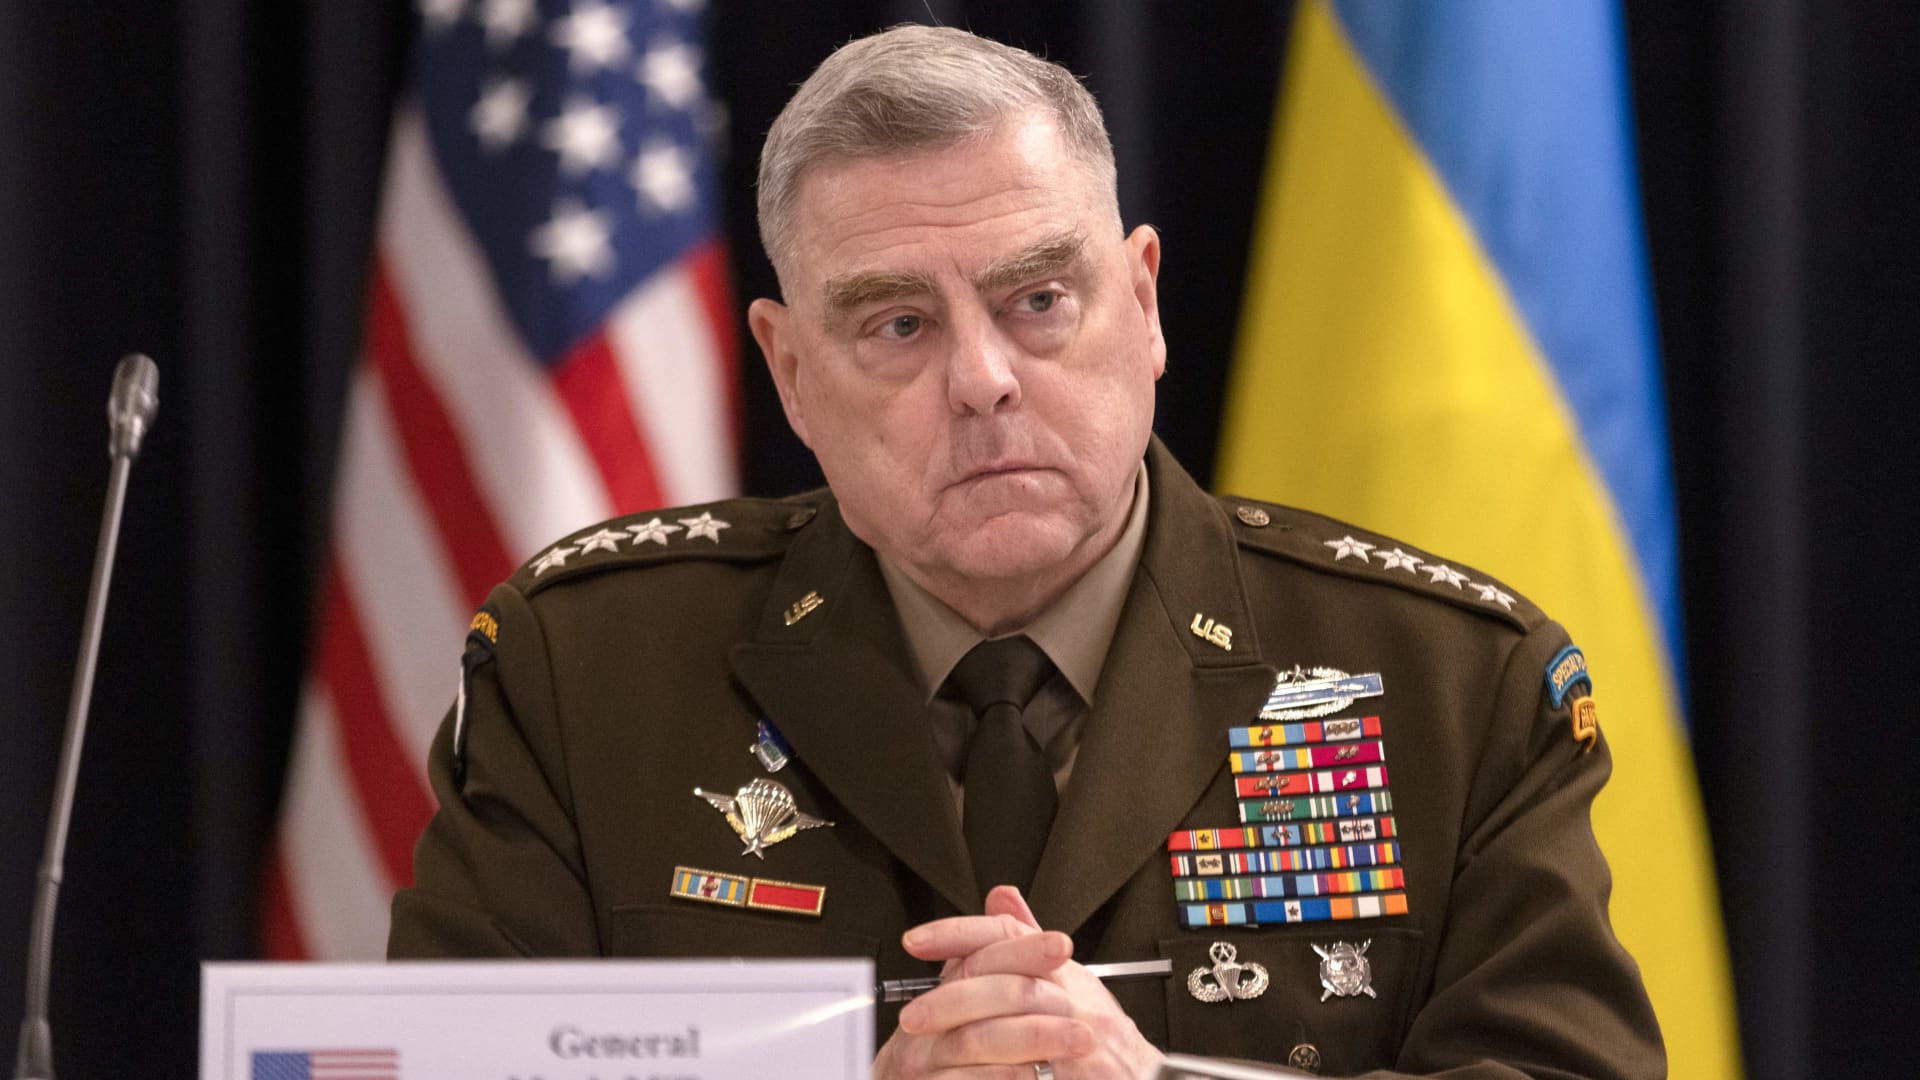 Ukraine's presidential office said Thursday that the Head of the Office of the President Andriy Yermak and Valerii Zaluzhnyi, the commander of Ukraine's armed forces, had spoken on the phone with U.S. National Security Advisor Jake Sullivan and Chairman of the Joint Chiefs of Staff General Mark Milley (pictured) on Thursday.